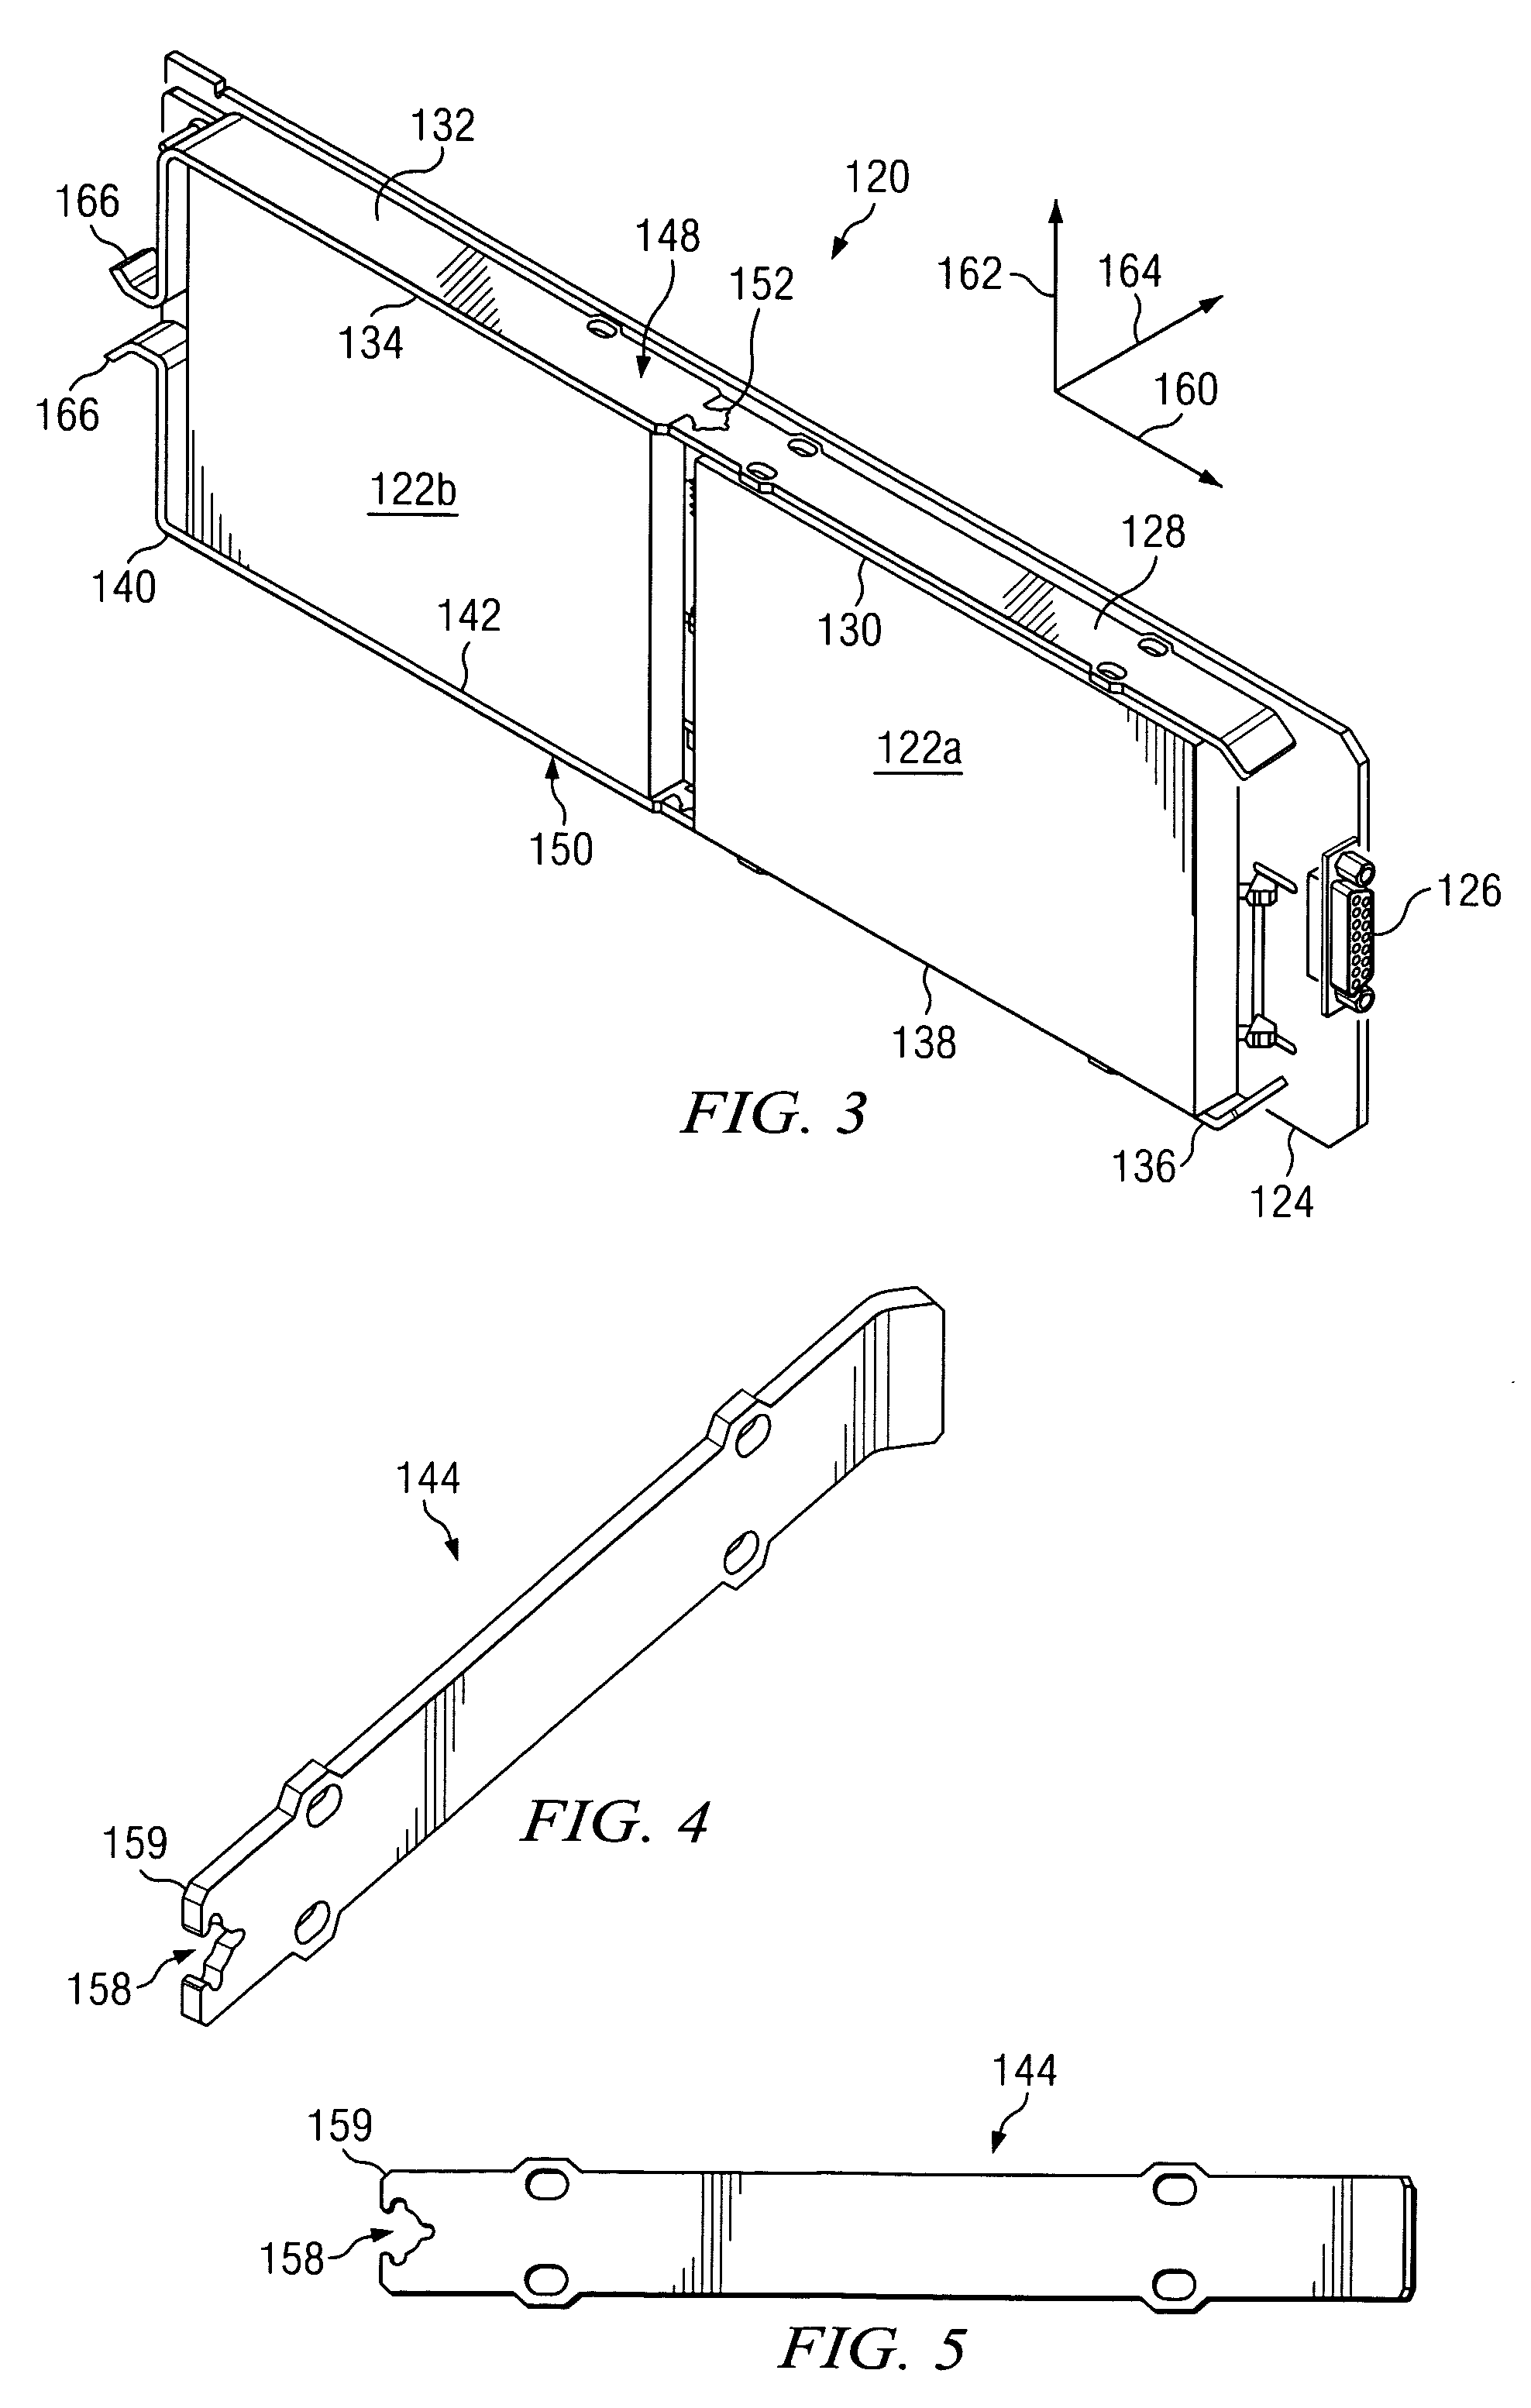 Media drive vibration isolation and attenuation method and apparatus